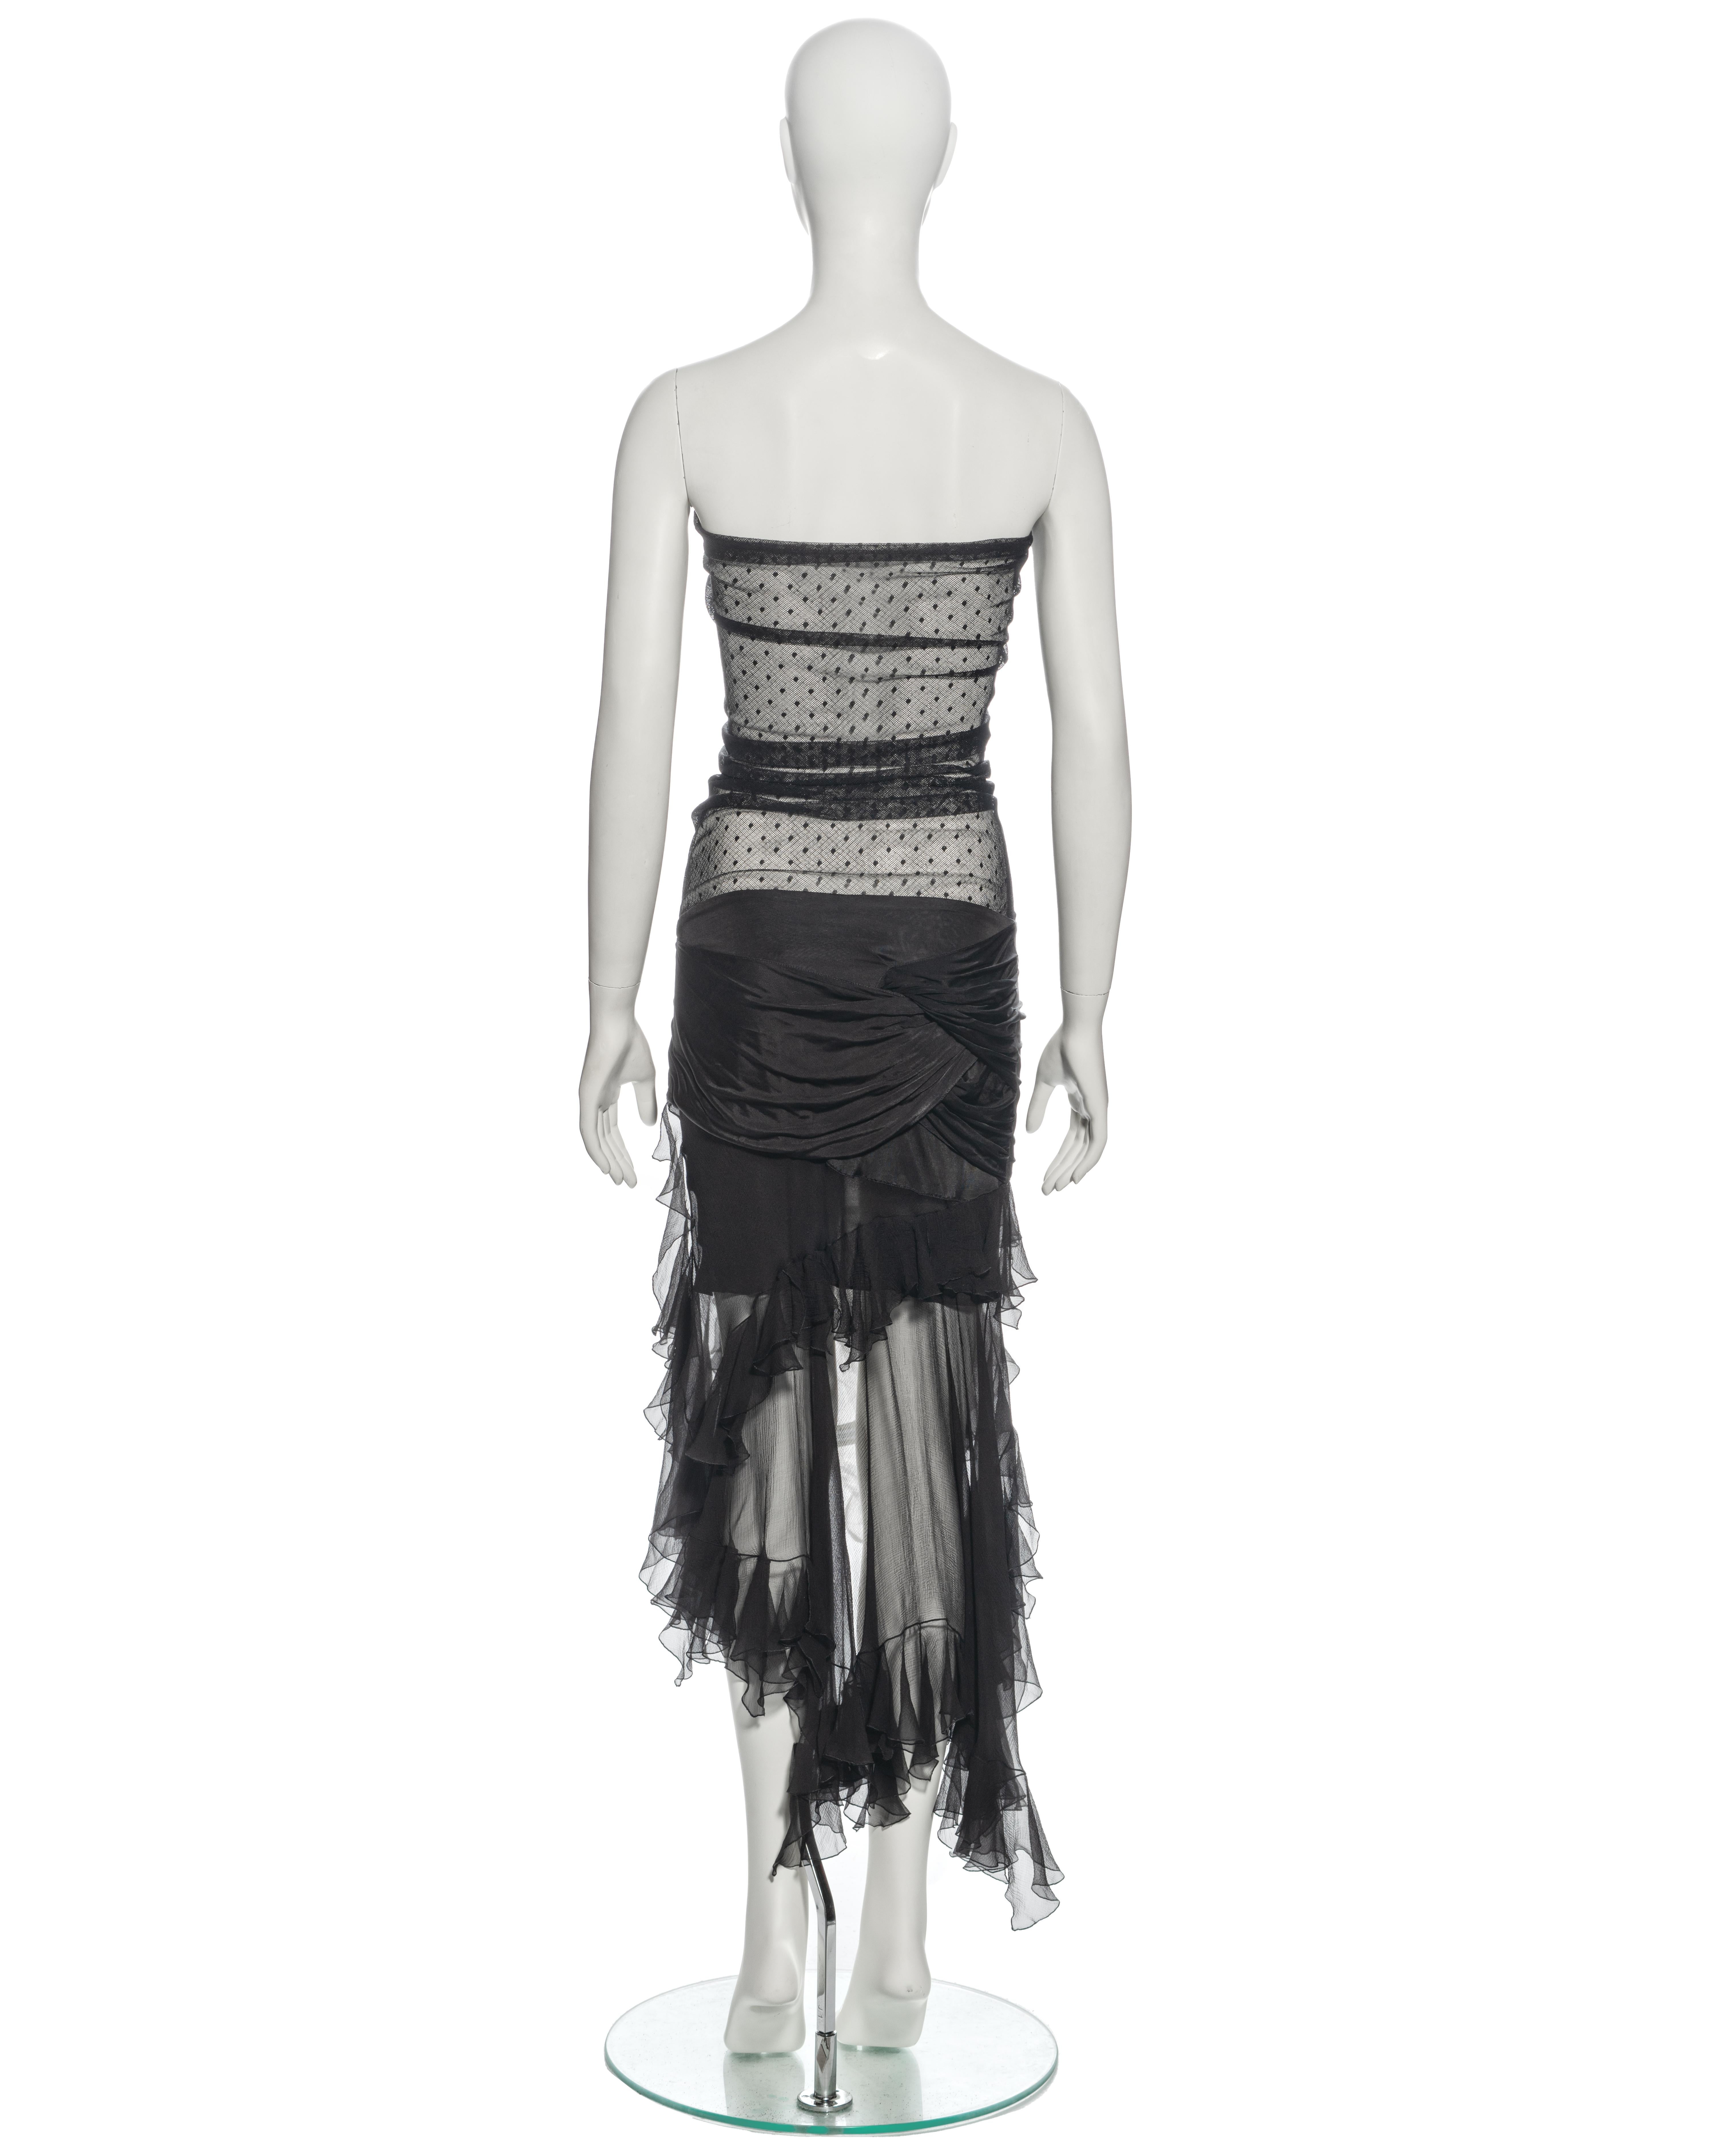 Christian Dior by John Galliano Black Strapless Silk and Mesh Dress, ss 2004 For Sale 7